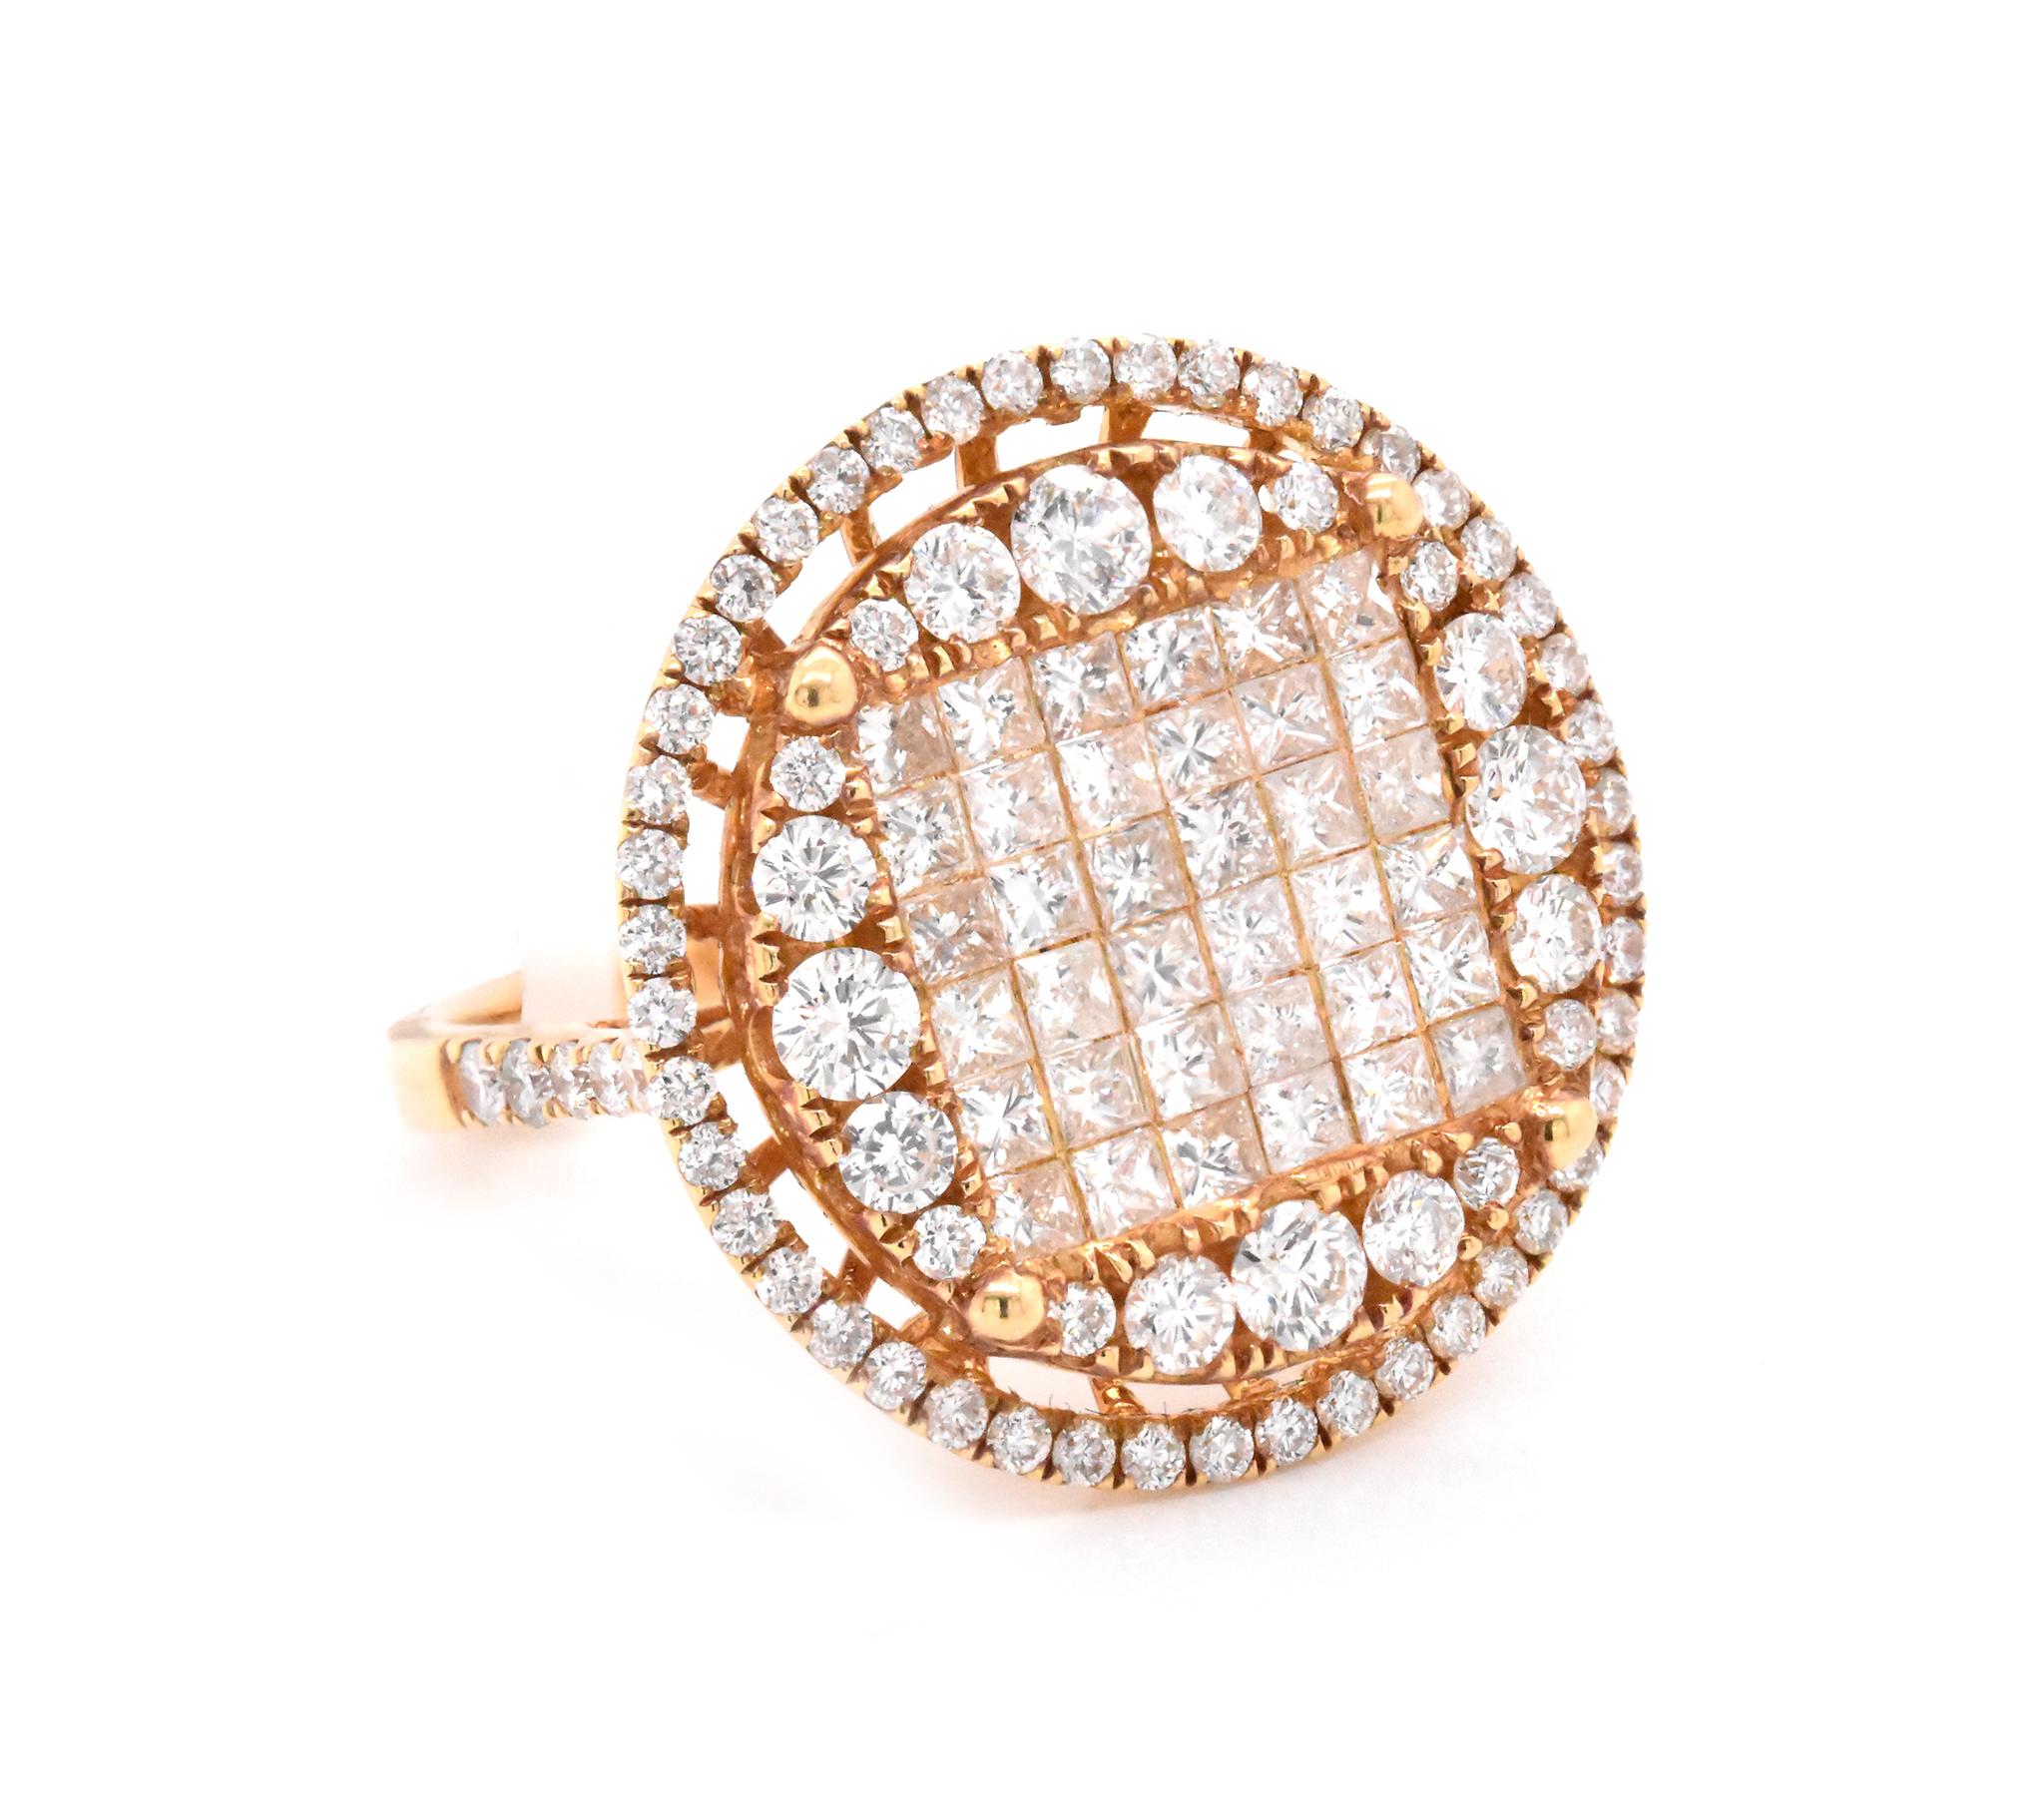 Material: 18K yellow gold
Diamonds: 112 princess and round cut = 2.45cttw
Color: G
Clarity: VS
Ring Size: 7 (Please allow up to two additional business days for sizing requests)
Dimensions: ring measures 20.85mm wide
Weight: 7.03 grams
